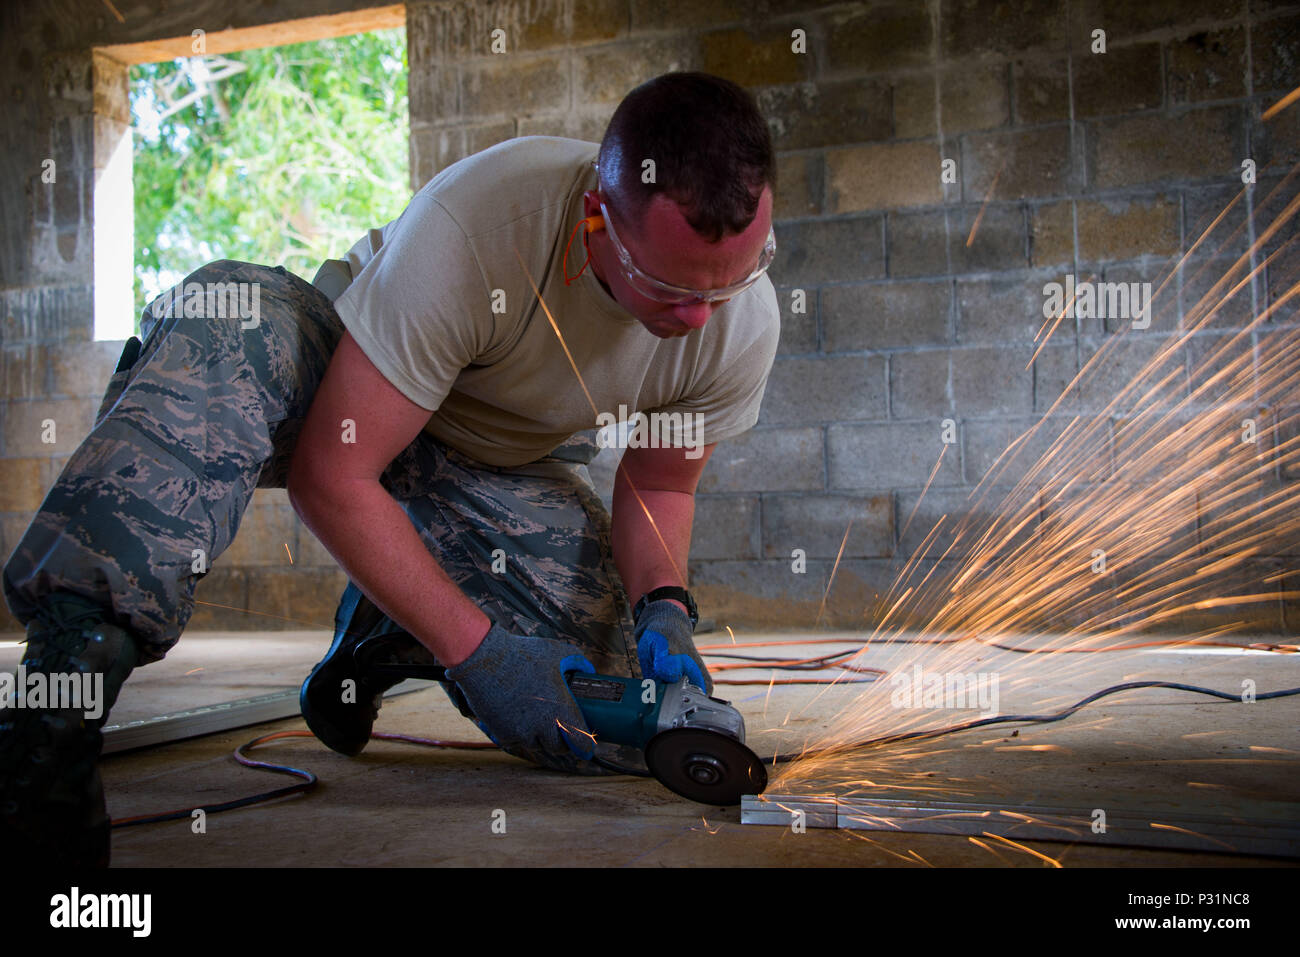 MALOJLOJ, Guam -- Airman 1st Class William Bush, a structures journeyman with the 134th Air Refueling Wing Civil Engineering squadron, cuts a metal stud to prepare for interior framing of a home.  The Airmen are working on two Habitat for Humanity homes in Guam as part of a government initiative that allows military assets the opportunity to assist non-profit organizations in conjunction with scheduled annual training. (Air National Guard photo by Tech. Sgt. Jonathan Young) Stock Photo